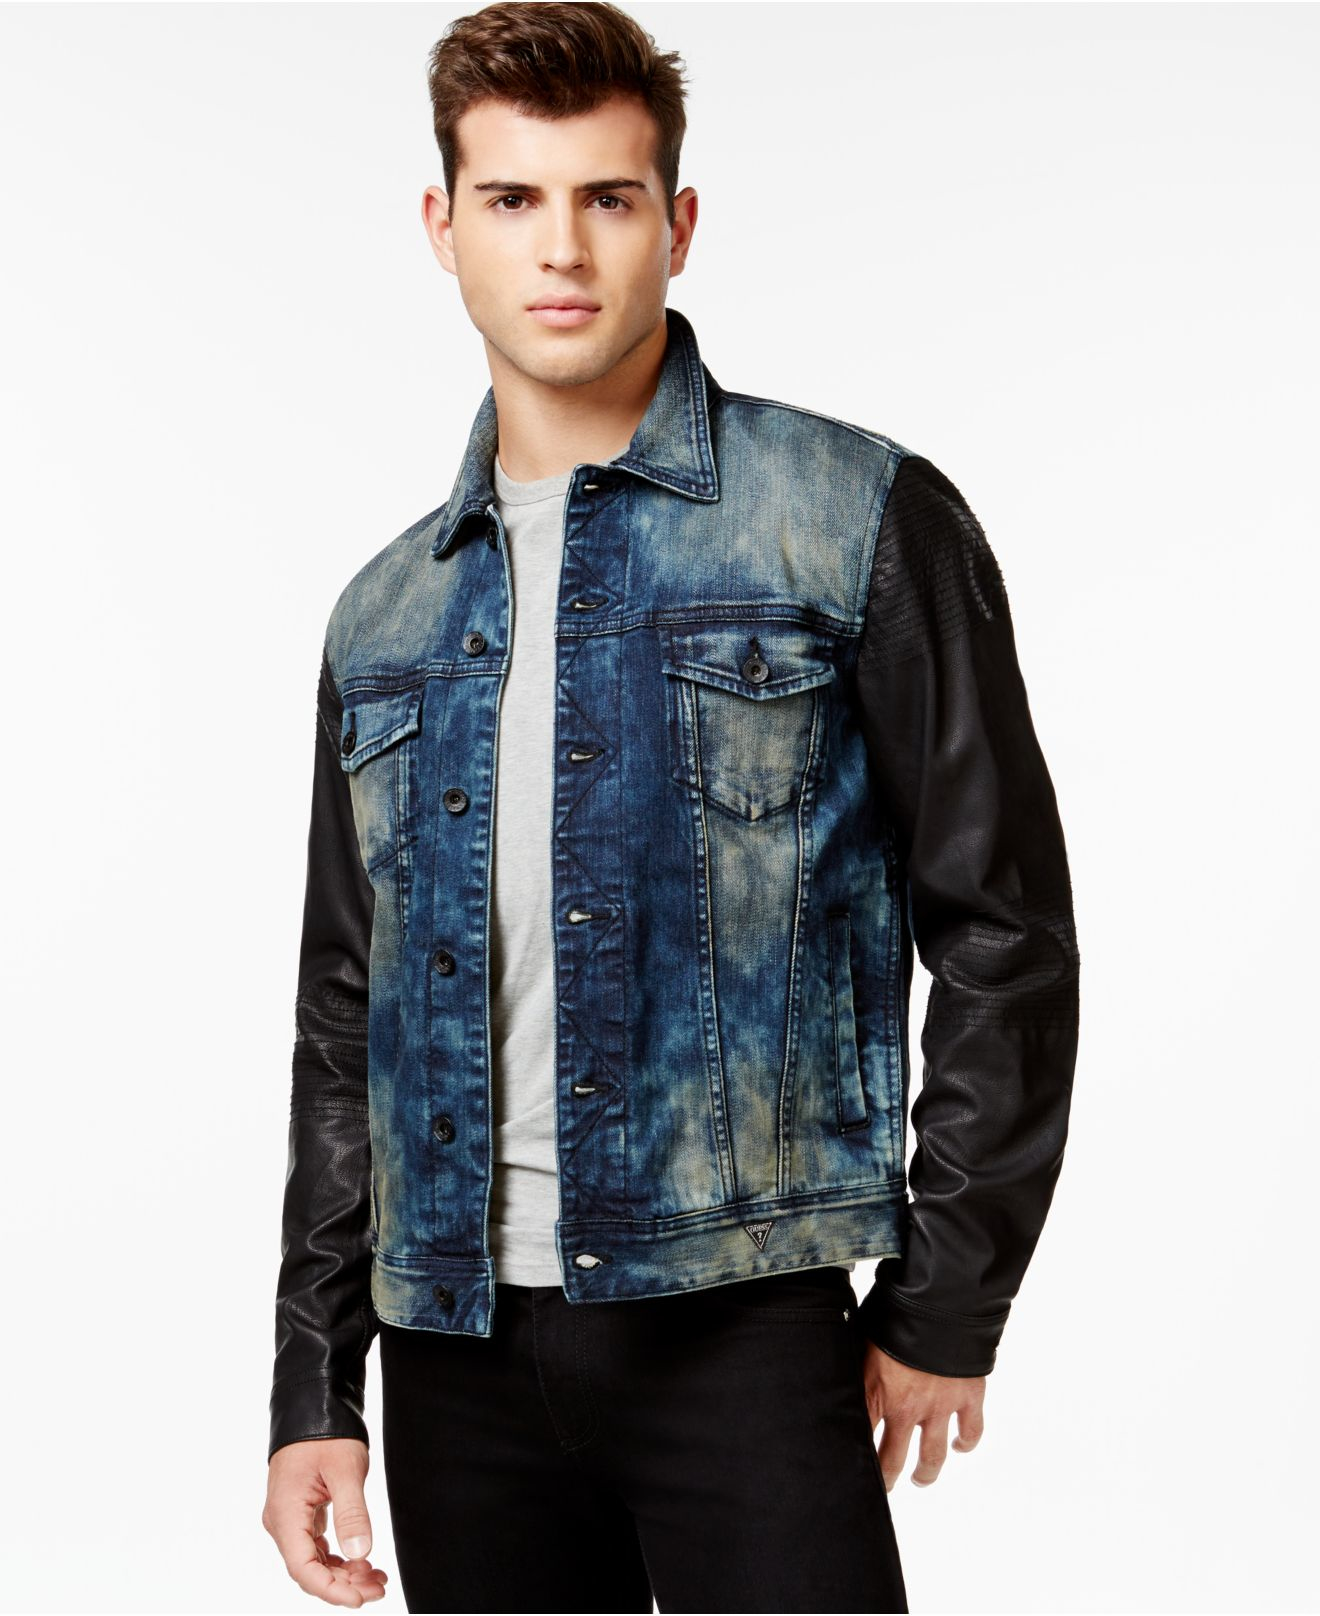 Guess Dillon Faux-leather Sleeve Jacket in Blue for Men - Lyst